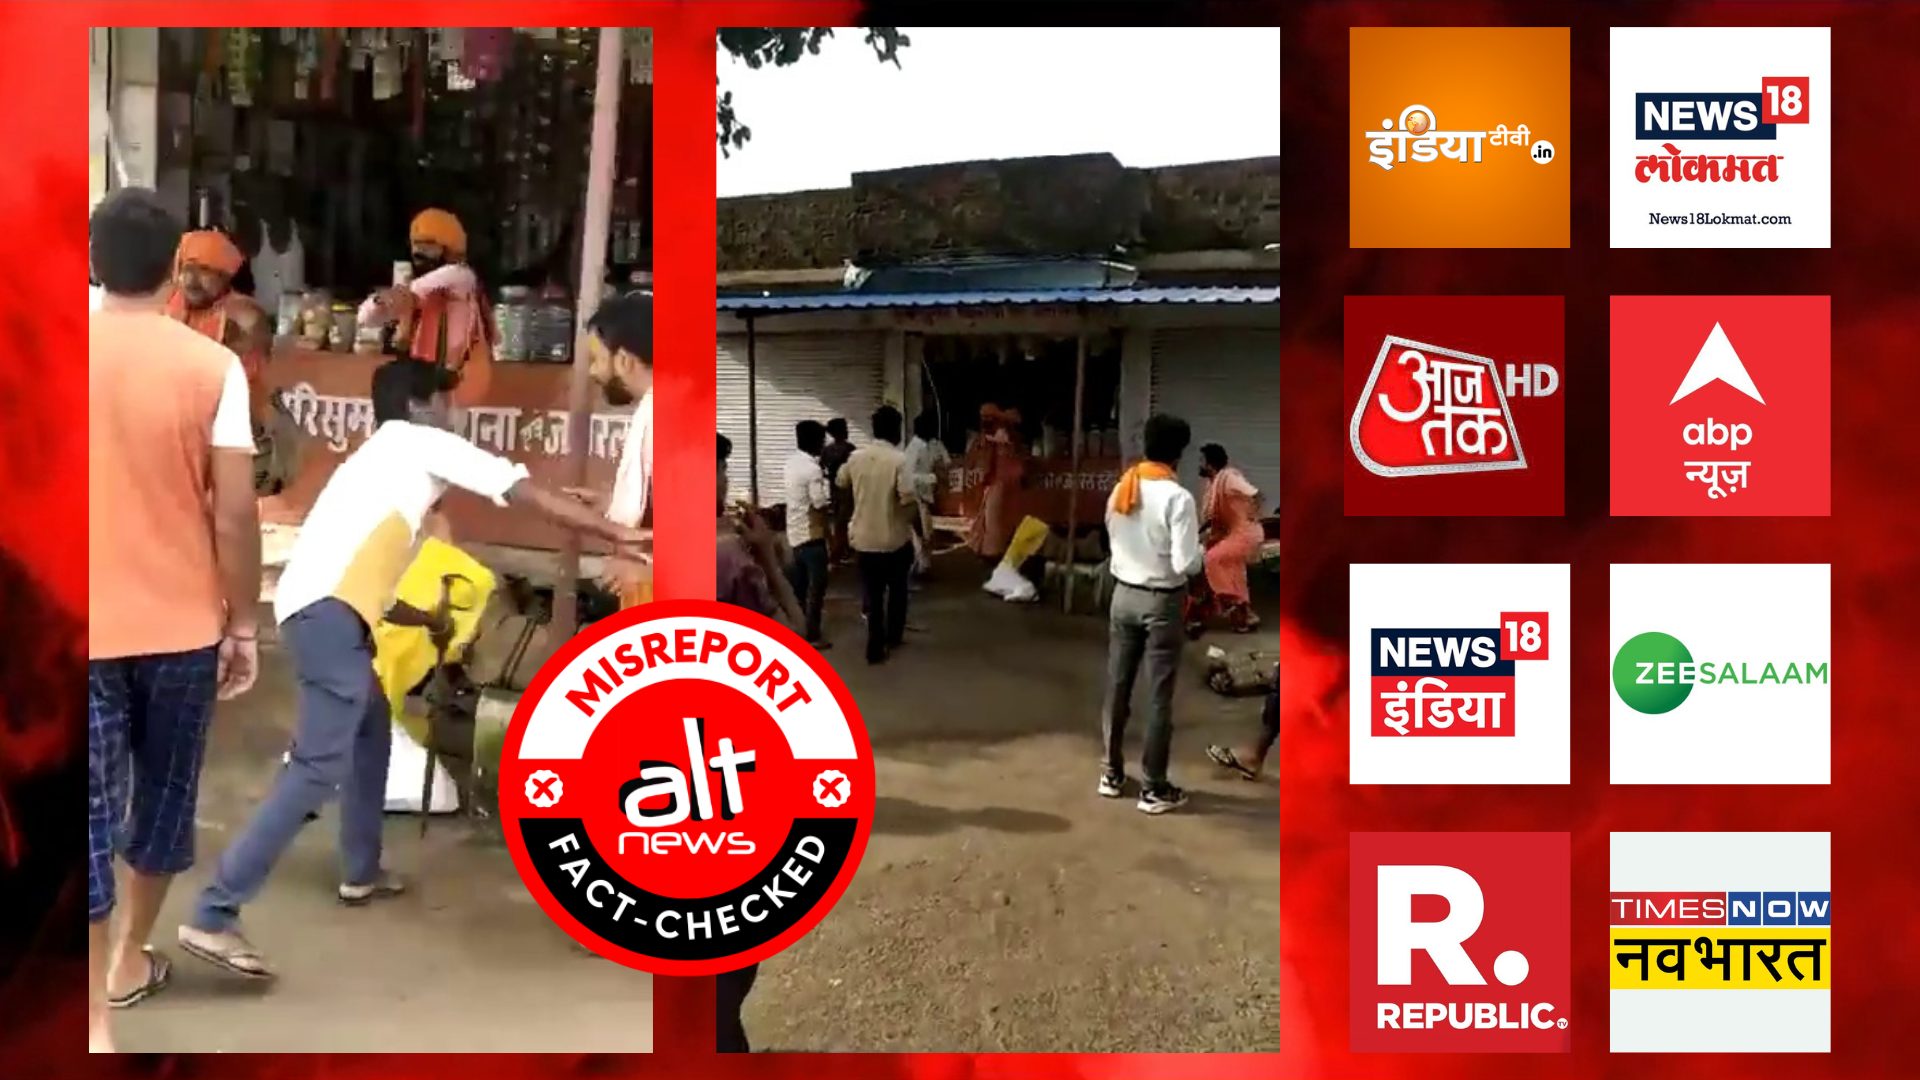 Media houses shared unrelated video from MP as sadhus beaten up for child theft in Maharashtra - Alt News